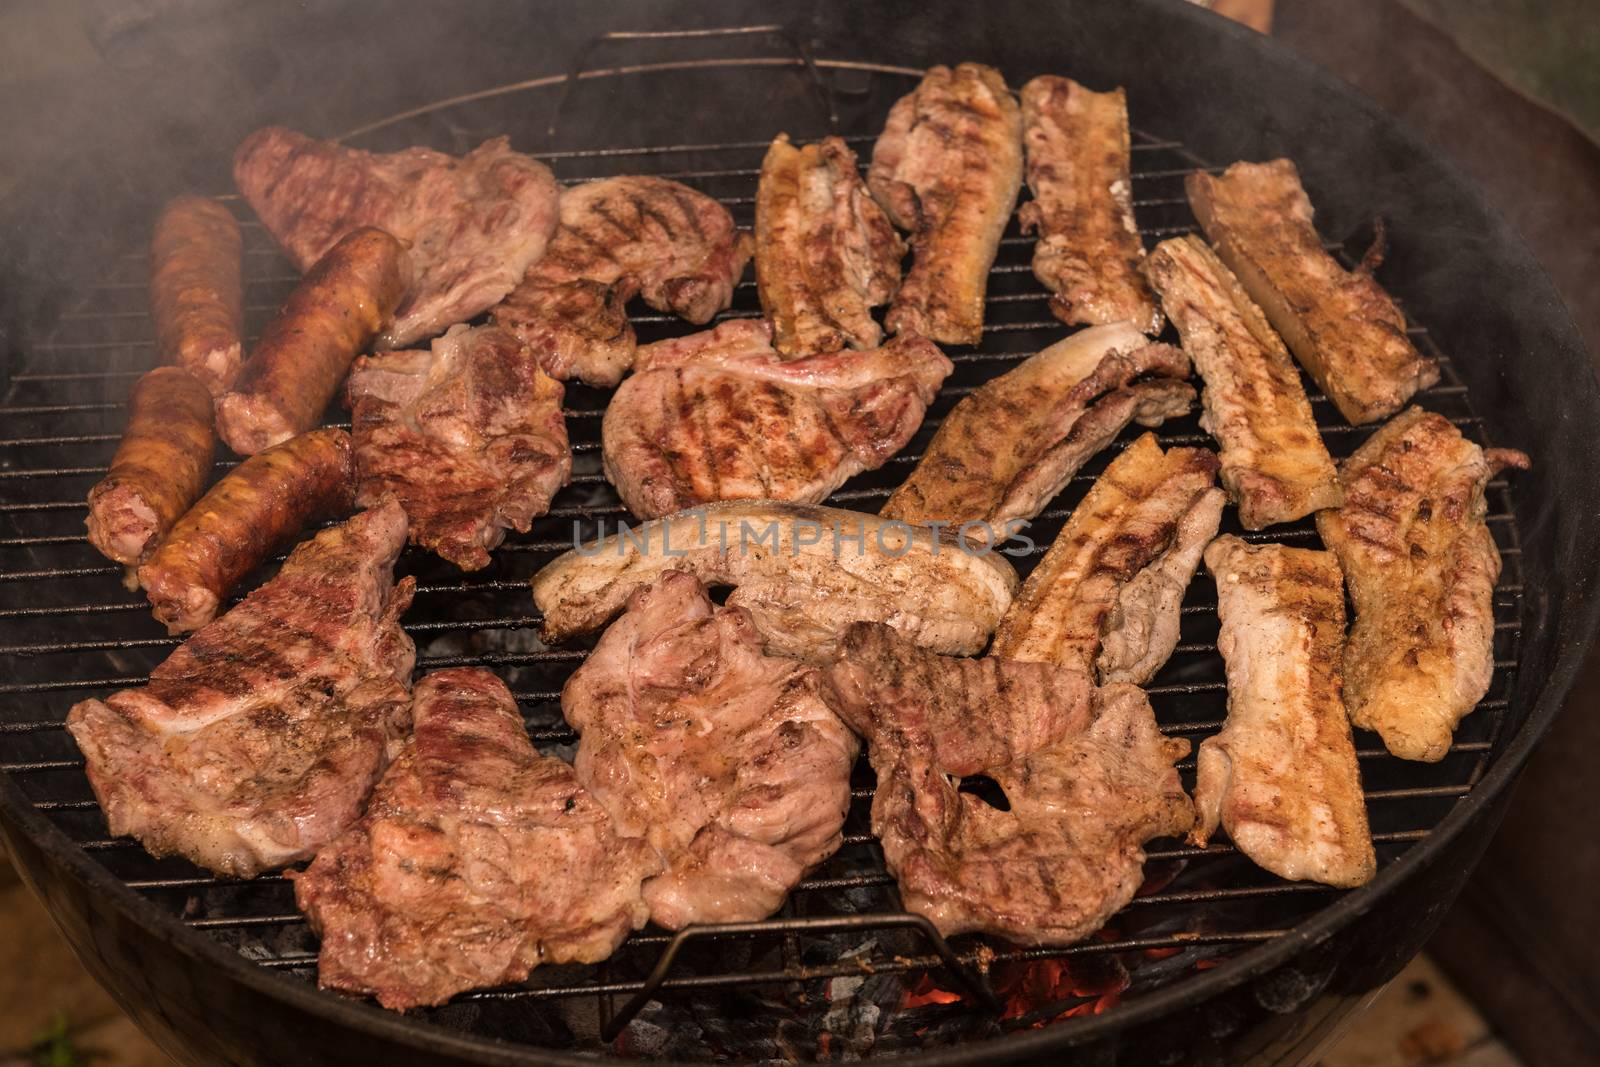 Grilling meats outdoors in a rustic old iron grill an hot coals for family gathering.